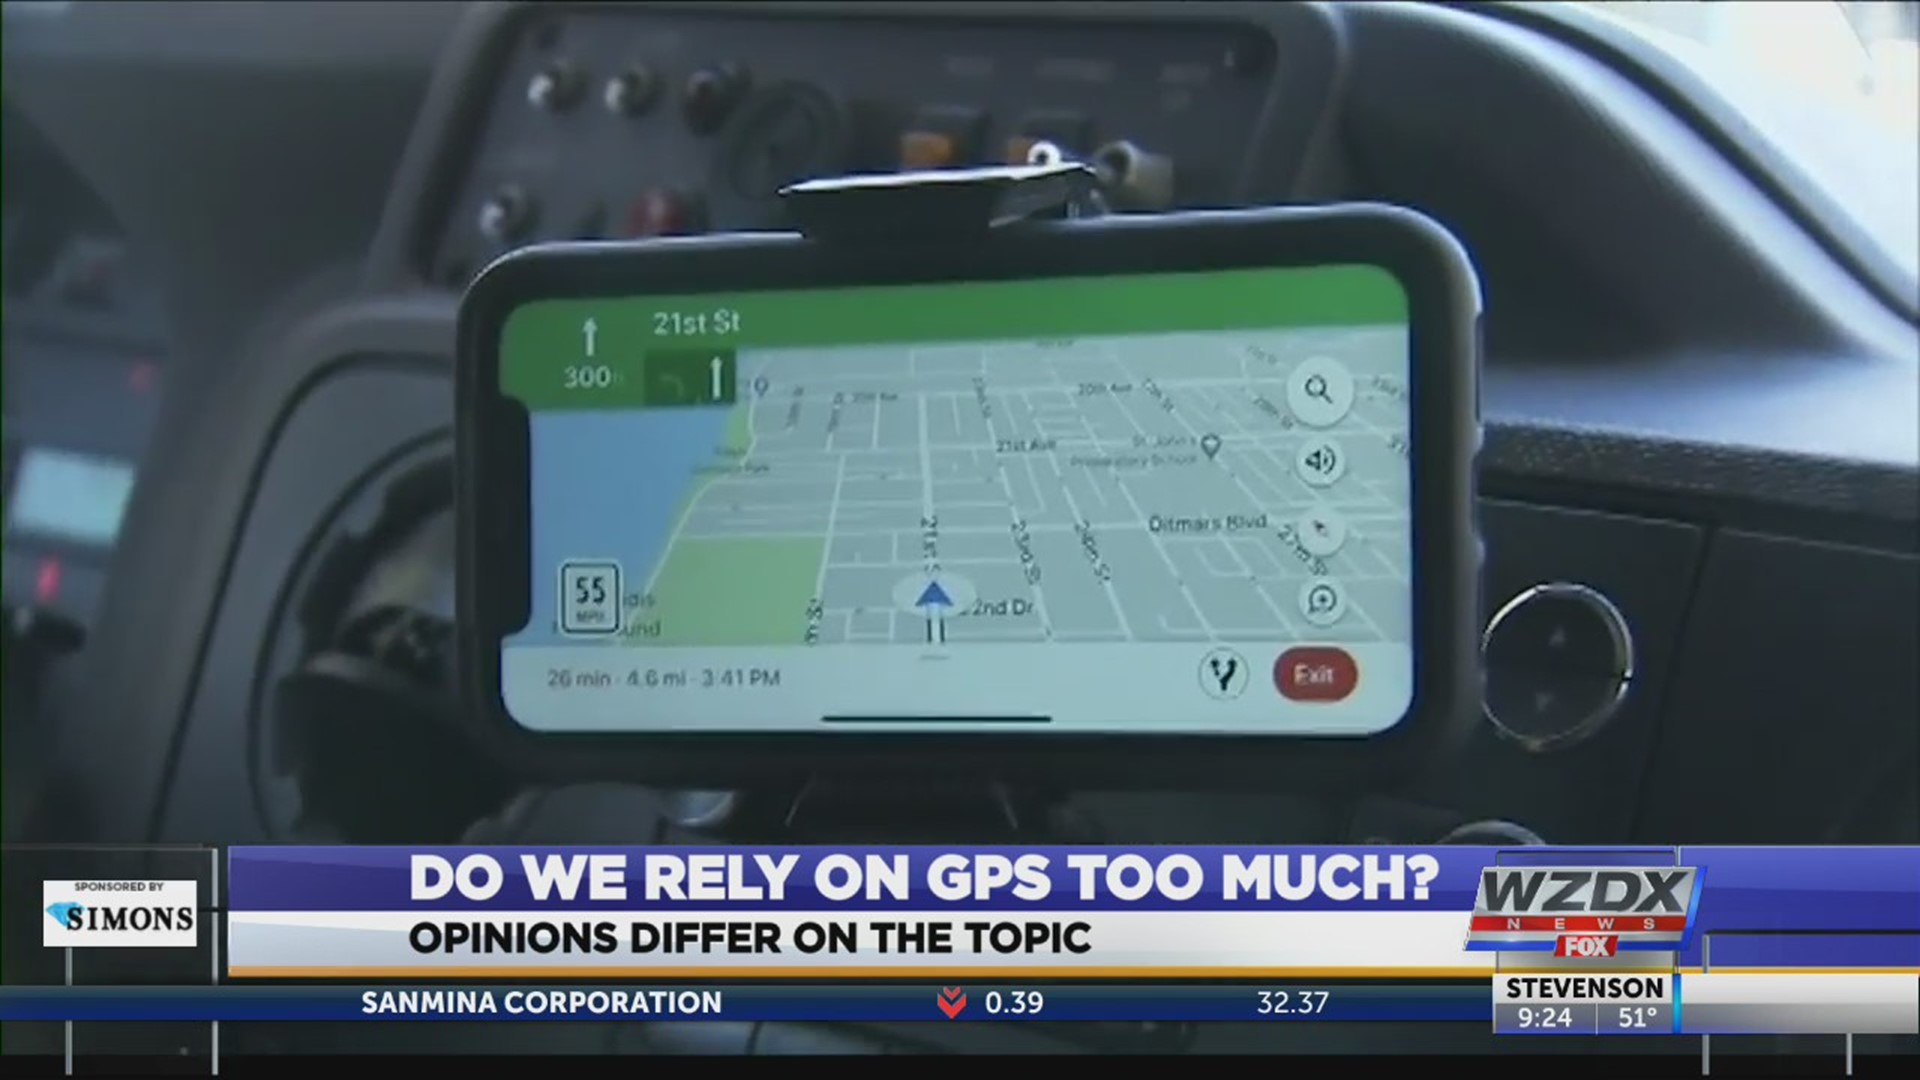 Most of us couldn't imagine driving without a GPS. But are we relying too much on our GPS systems?